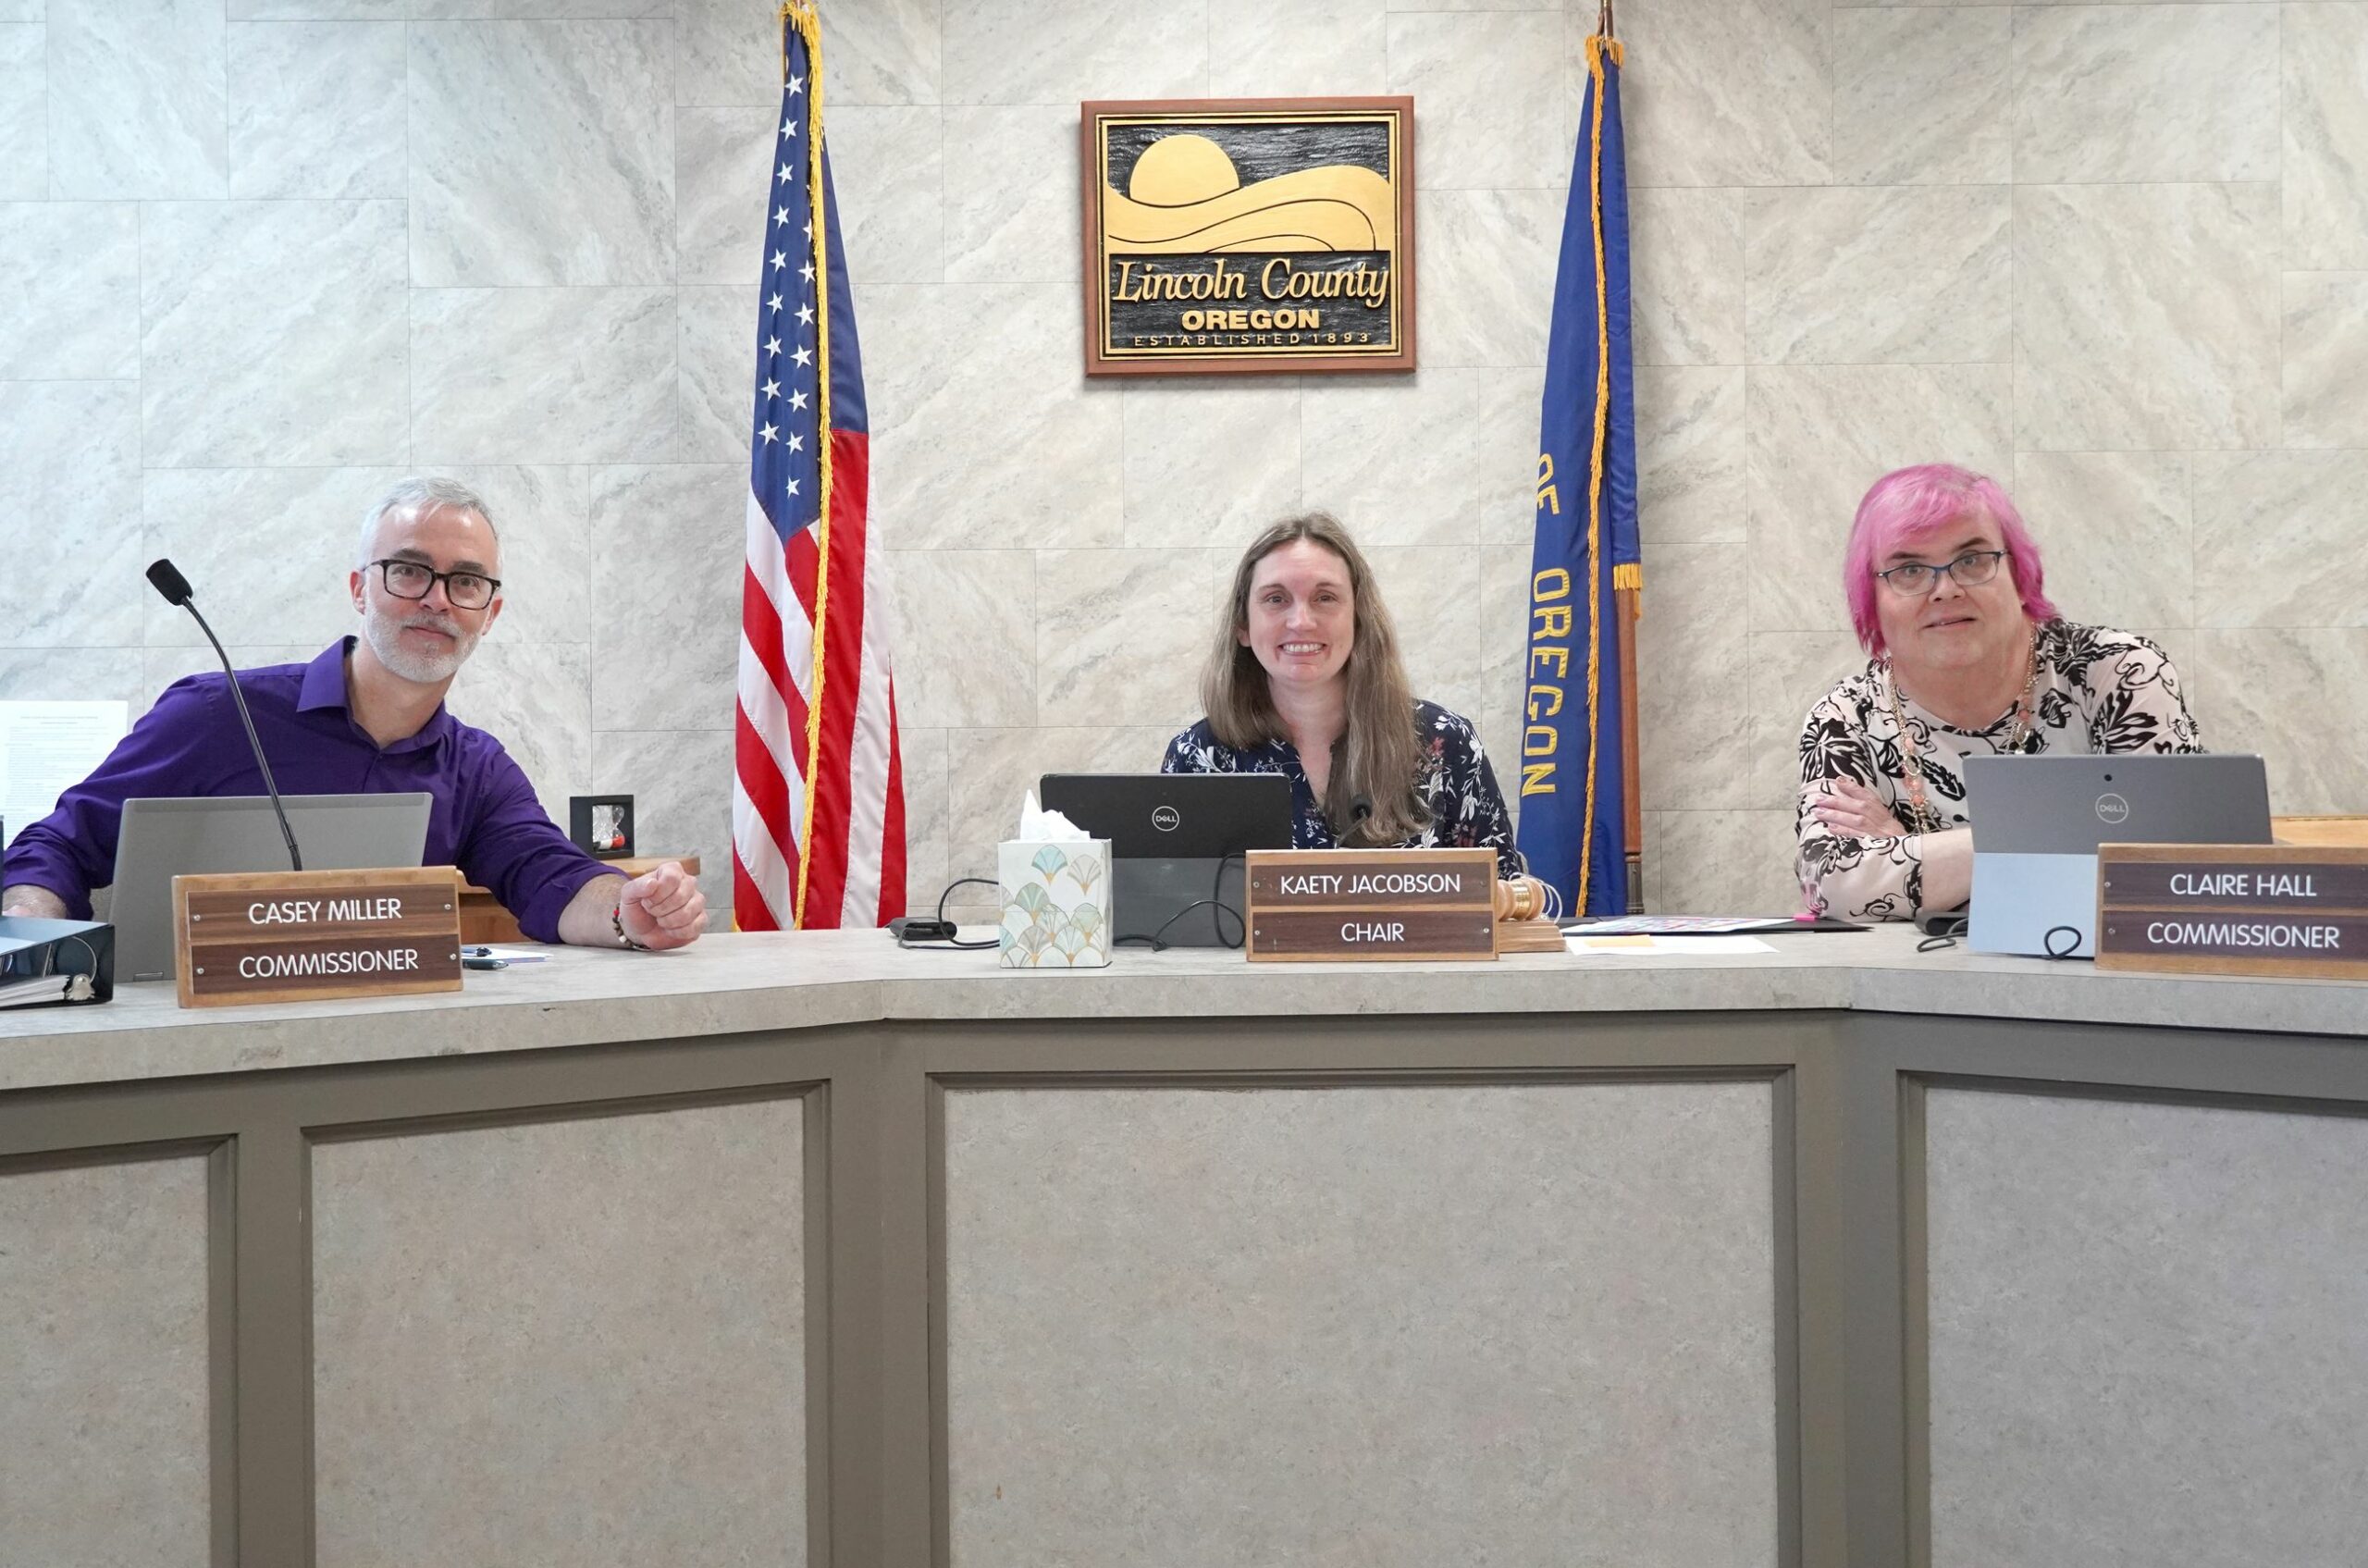 The Lincoln County Board of Commissioners include Casey Miller, Chair Kaety Jacobson, and Claire Hall.
